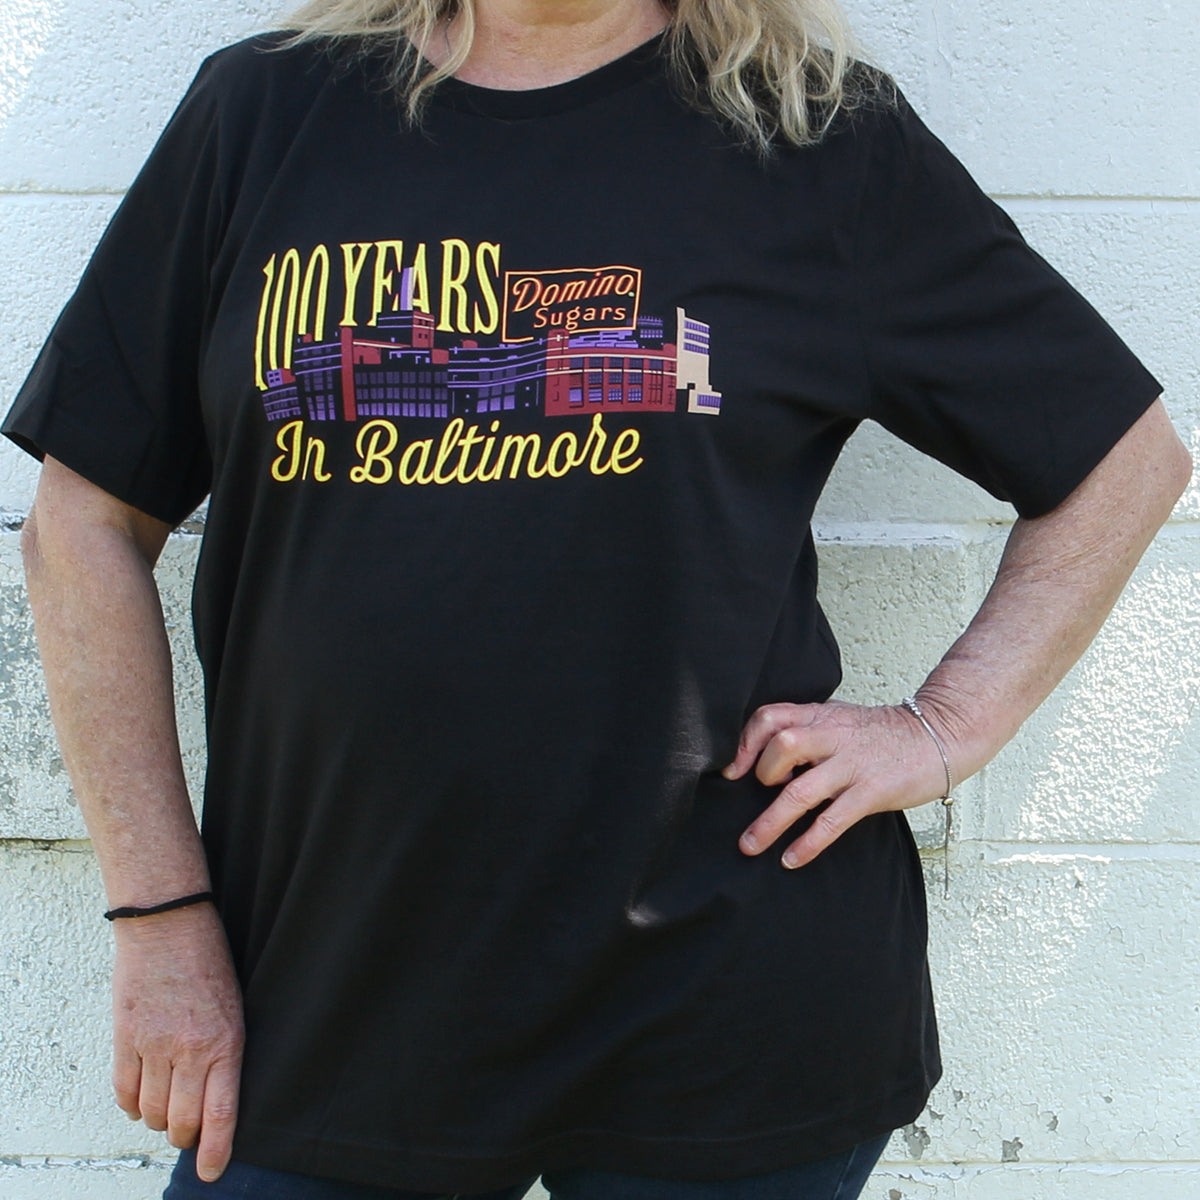 Domino Sugar® 100 Years in Baltimore (Vintage Black) / Shirt - Route One Apparel